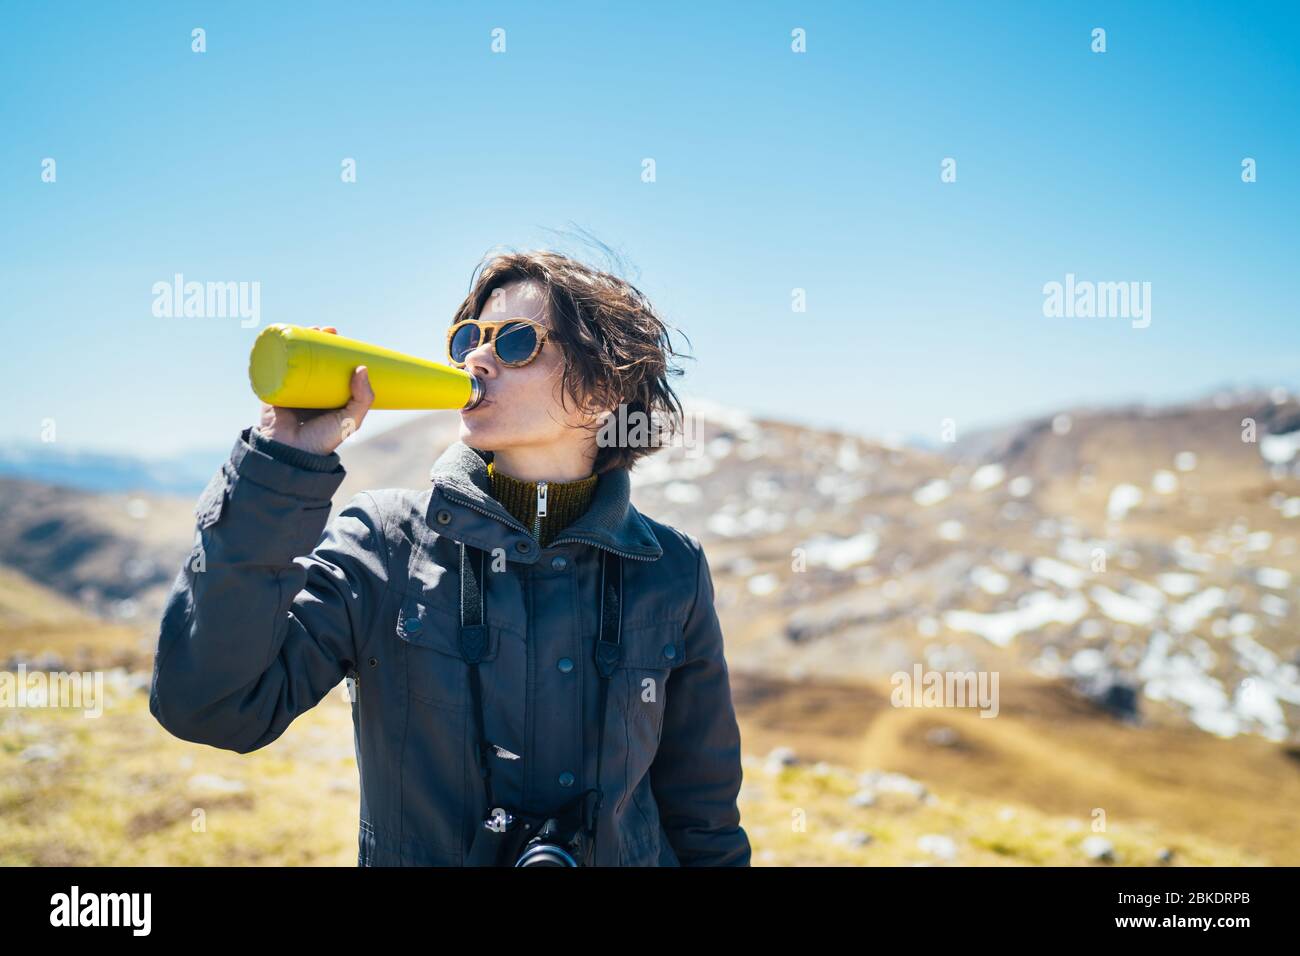 Young woman spending free time in national park/mountains.Hiking outdoor experience.Drinking from reusable vacuum insulated water bottle.Environmental Stock Photo